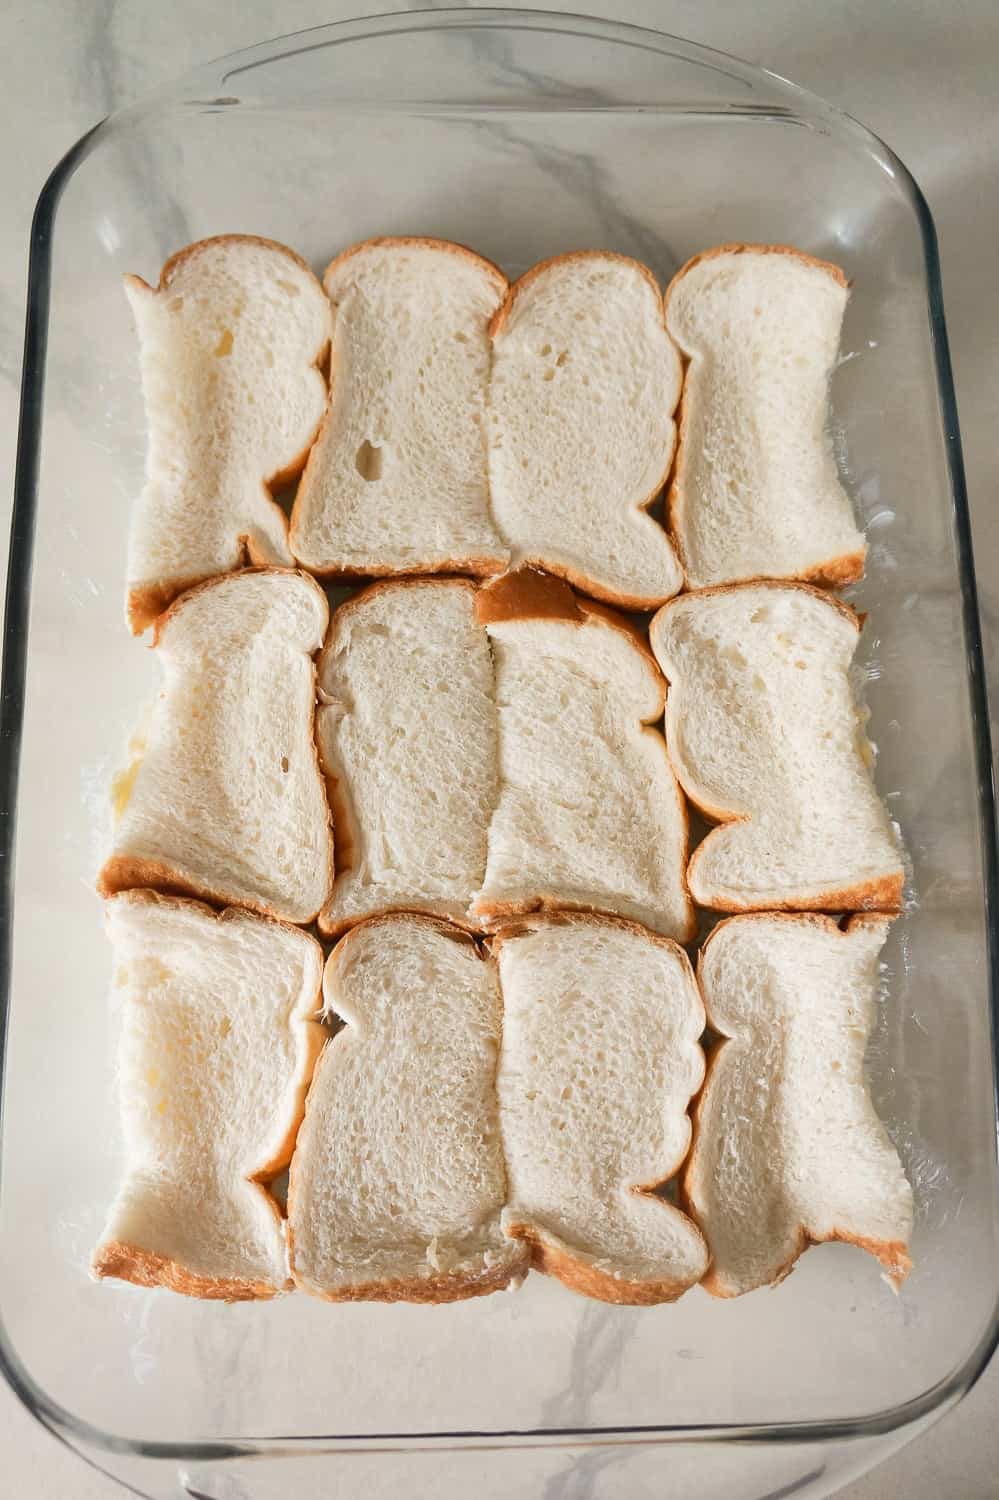 bread slices in the bottom of a 9 x 13 inch baking dish